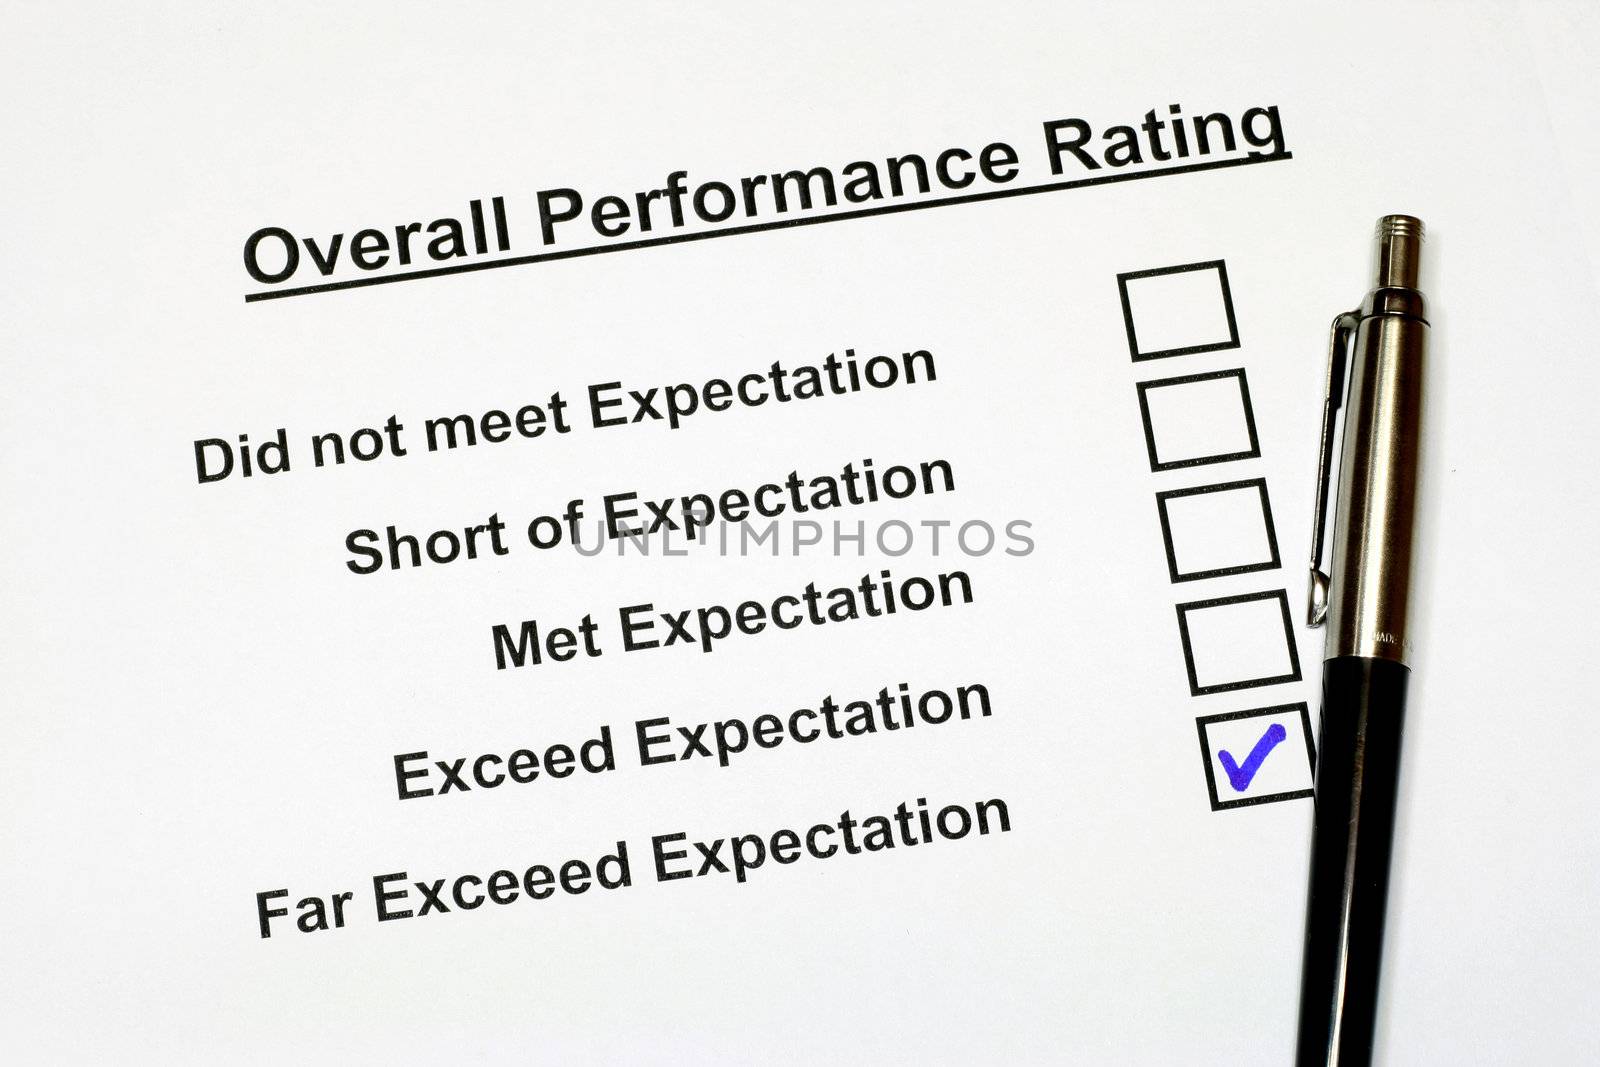 Overall Performance Rating Form checked the Far exceed expectation